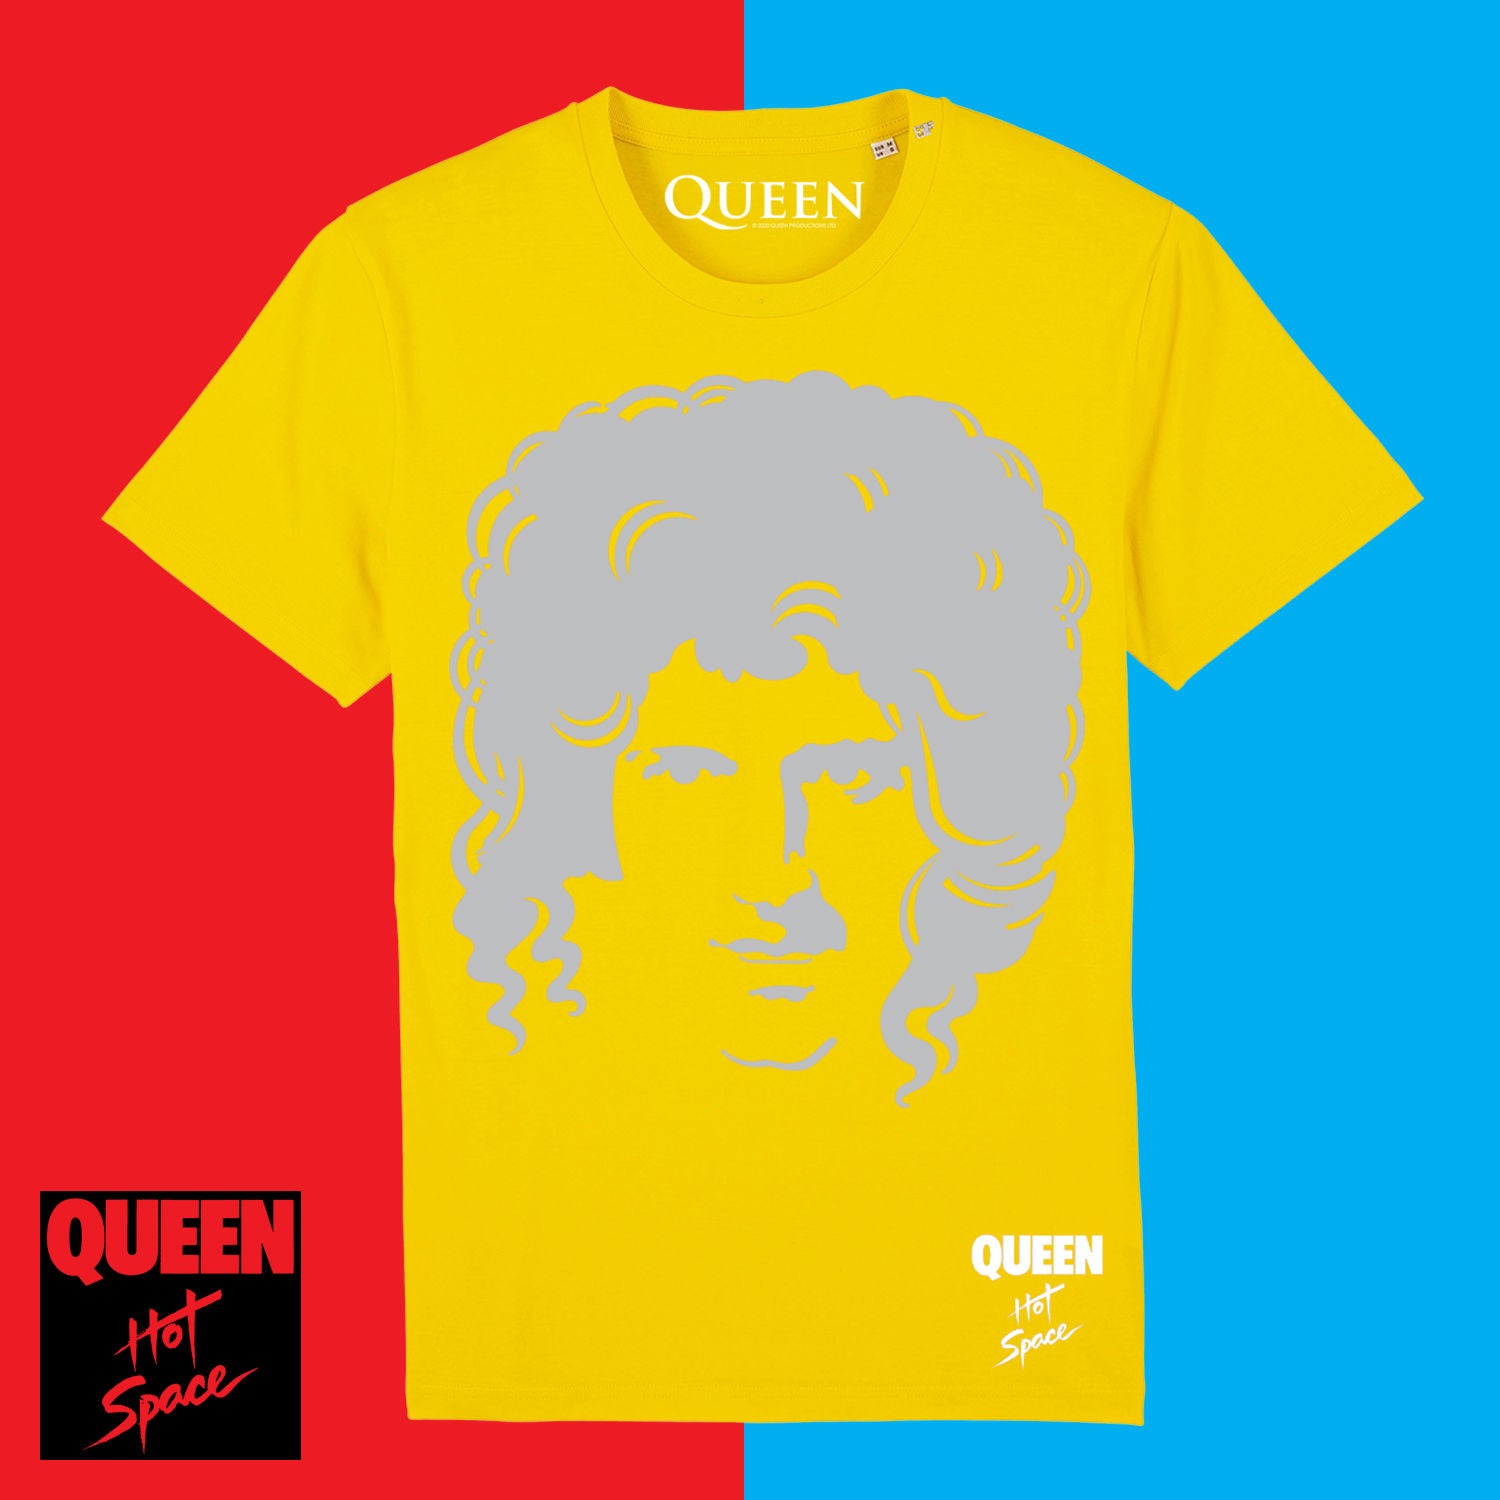 Queen - Limited Edition Hot Space Brian T-Shirt